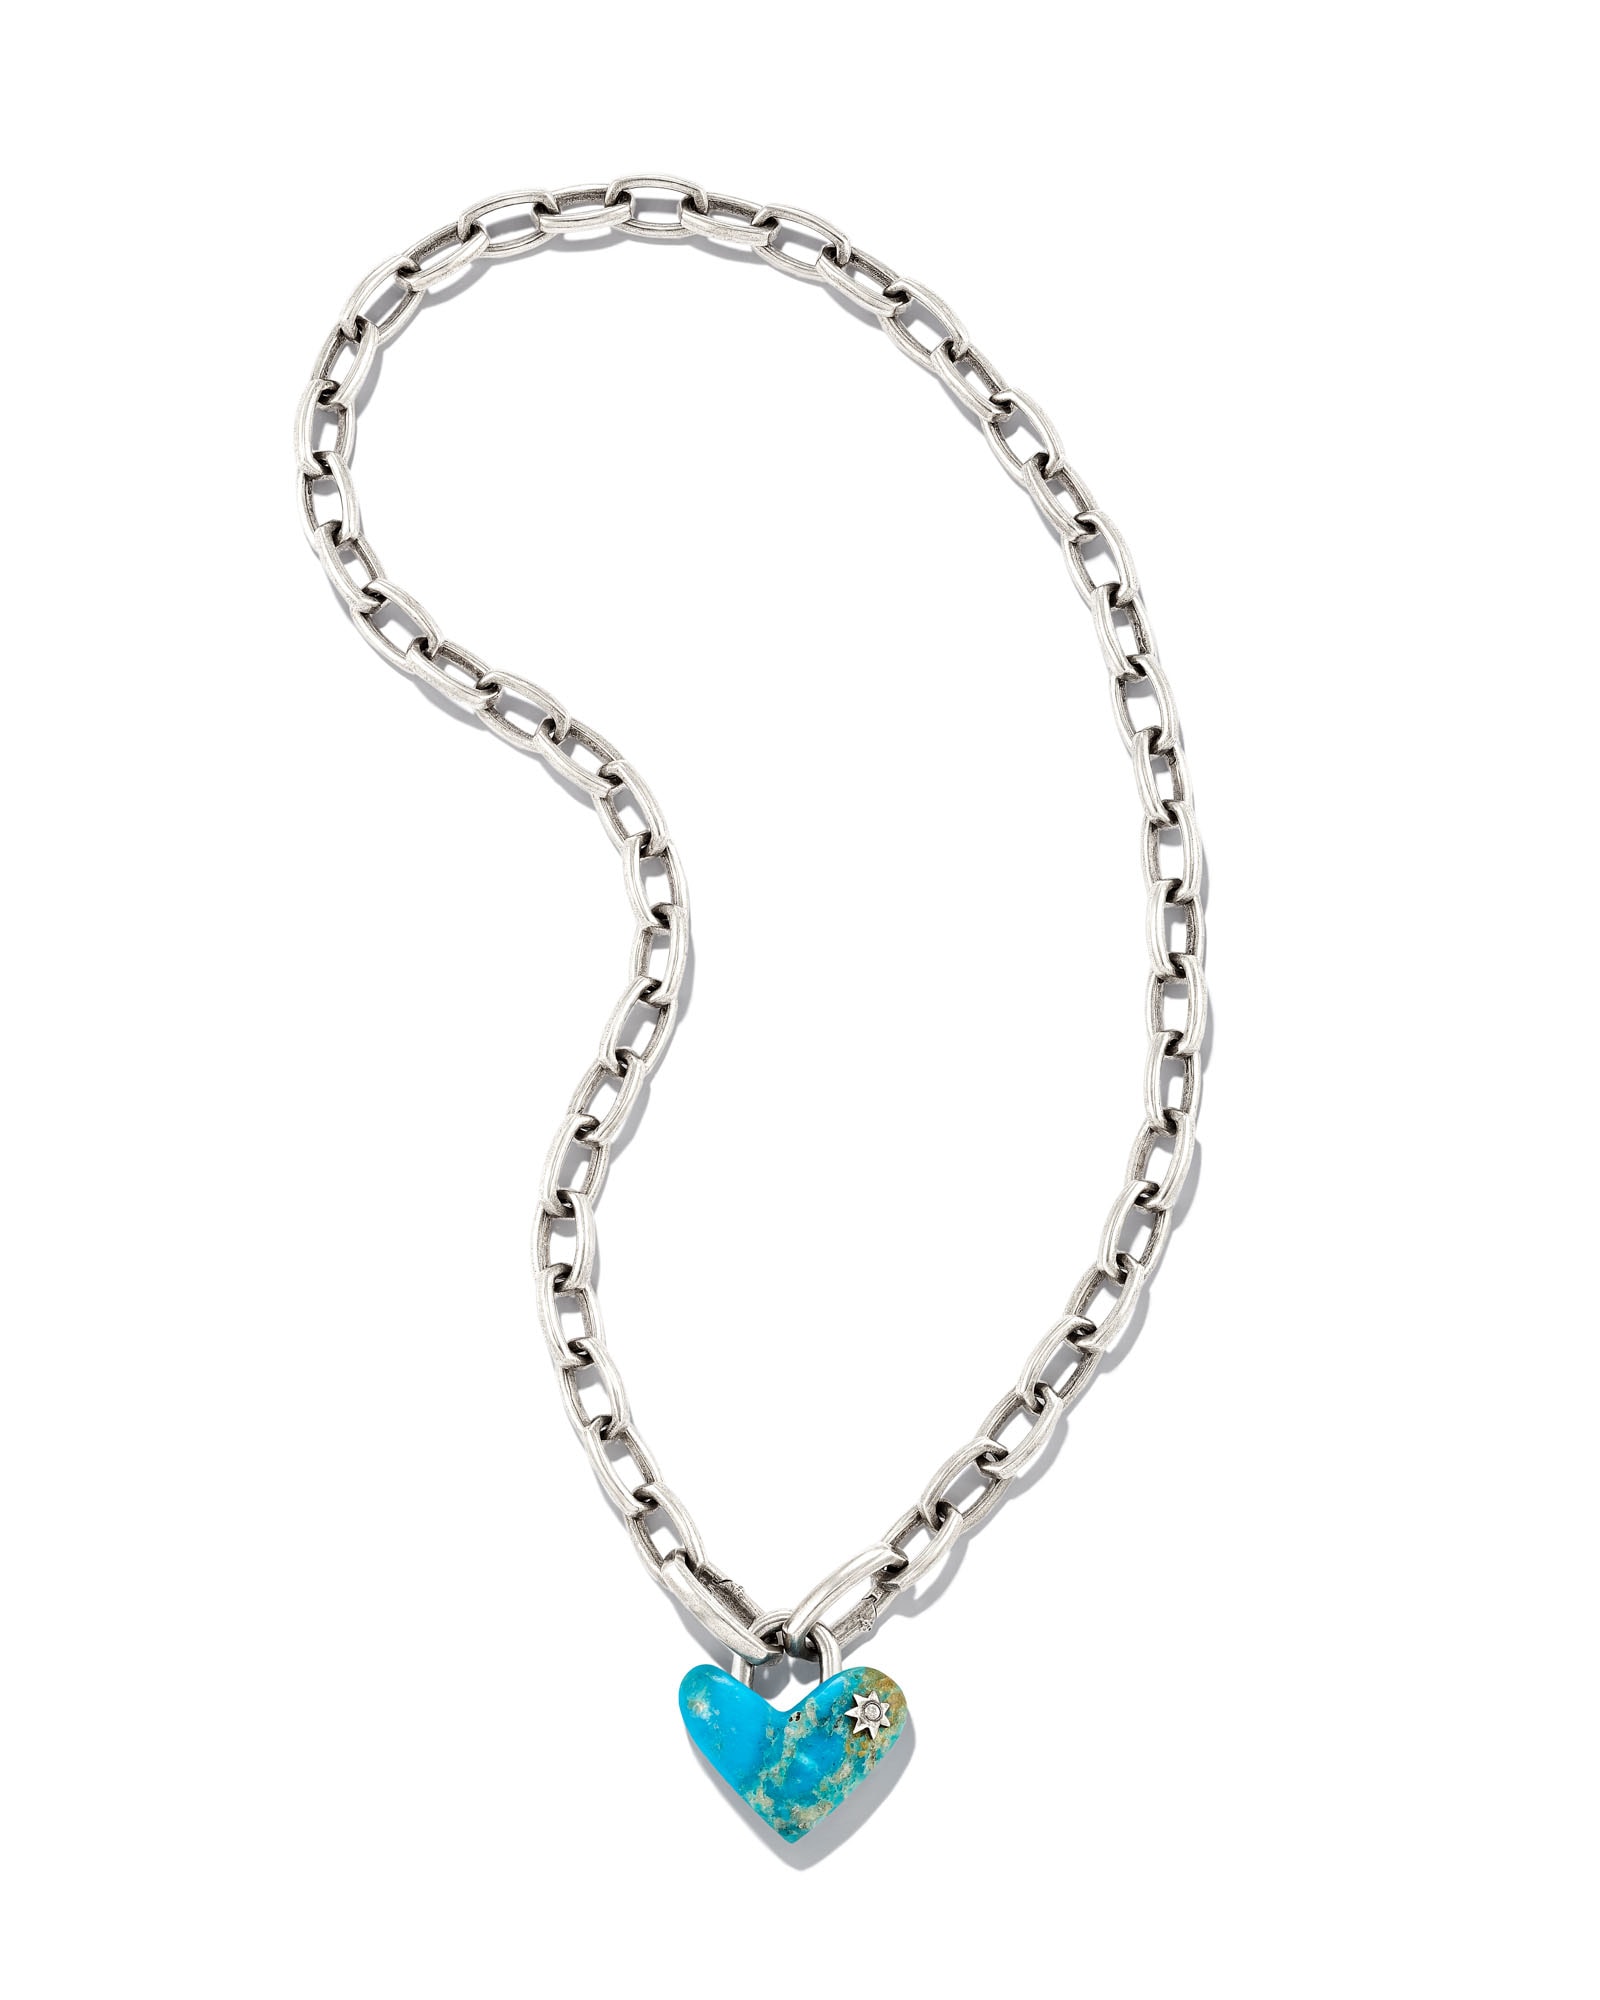 Angie Carved Heart Sterling Silver Statement Necklace in Turquoise